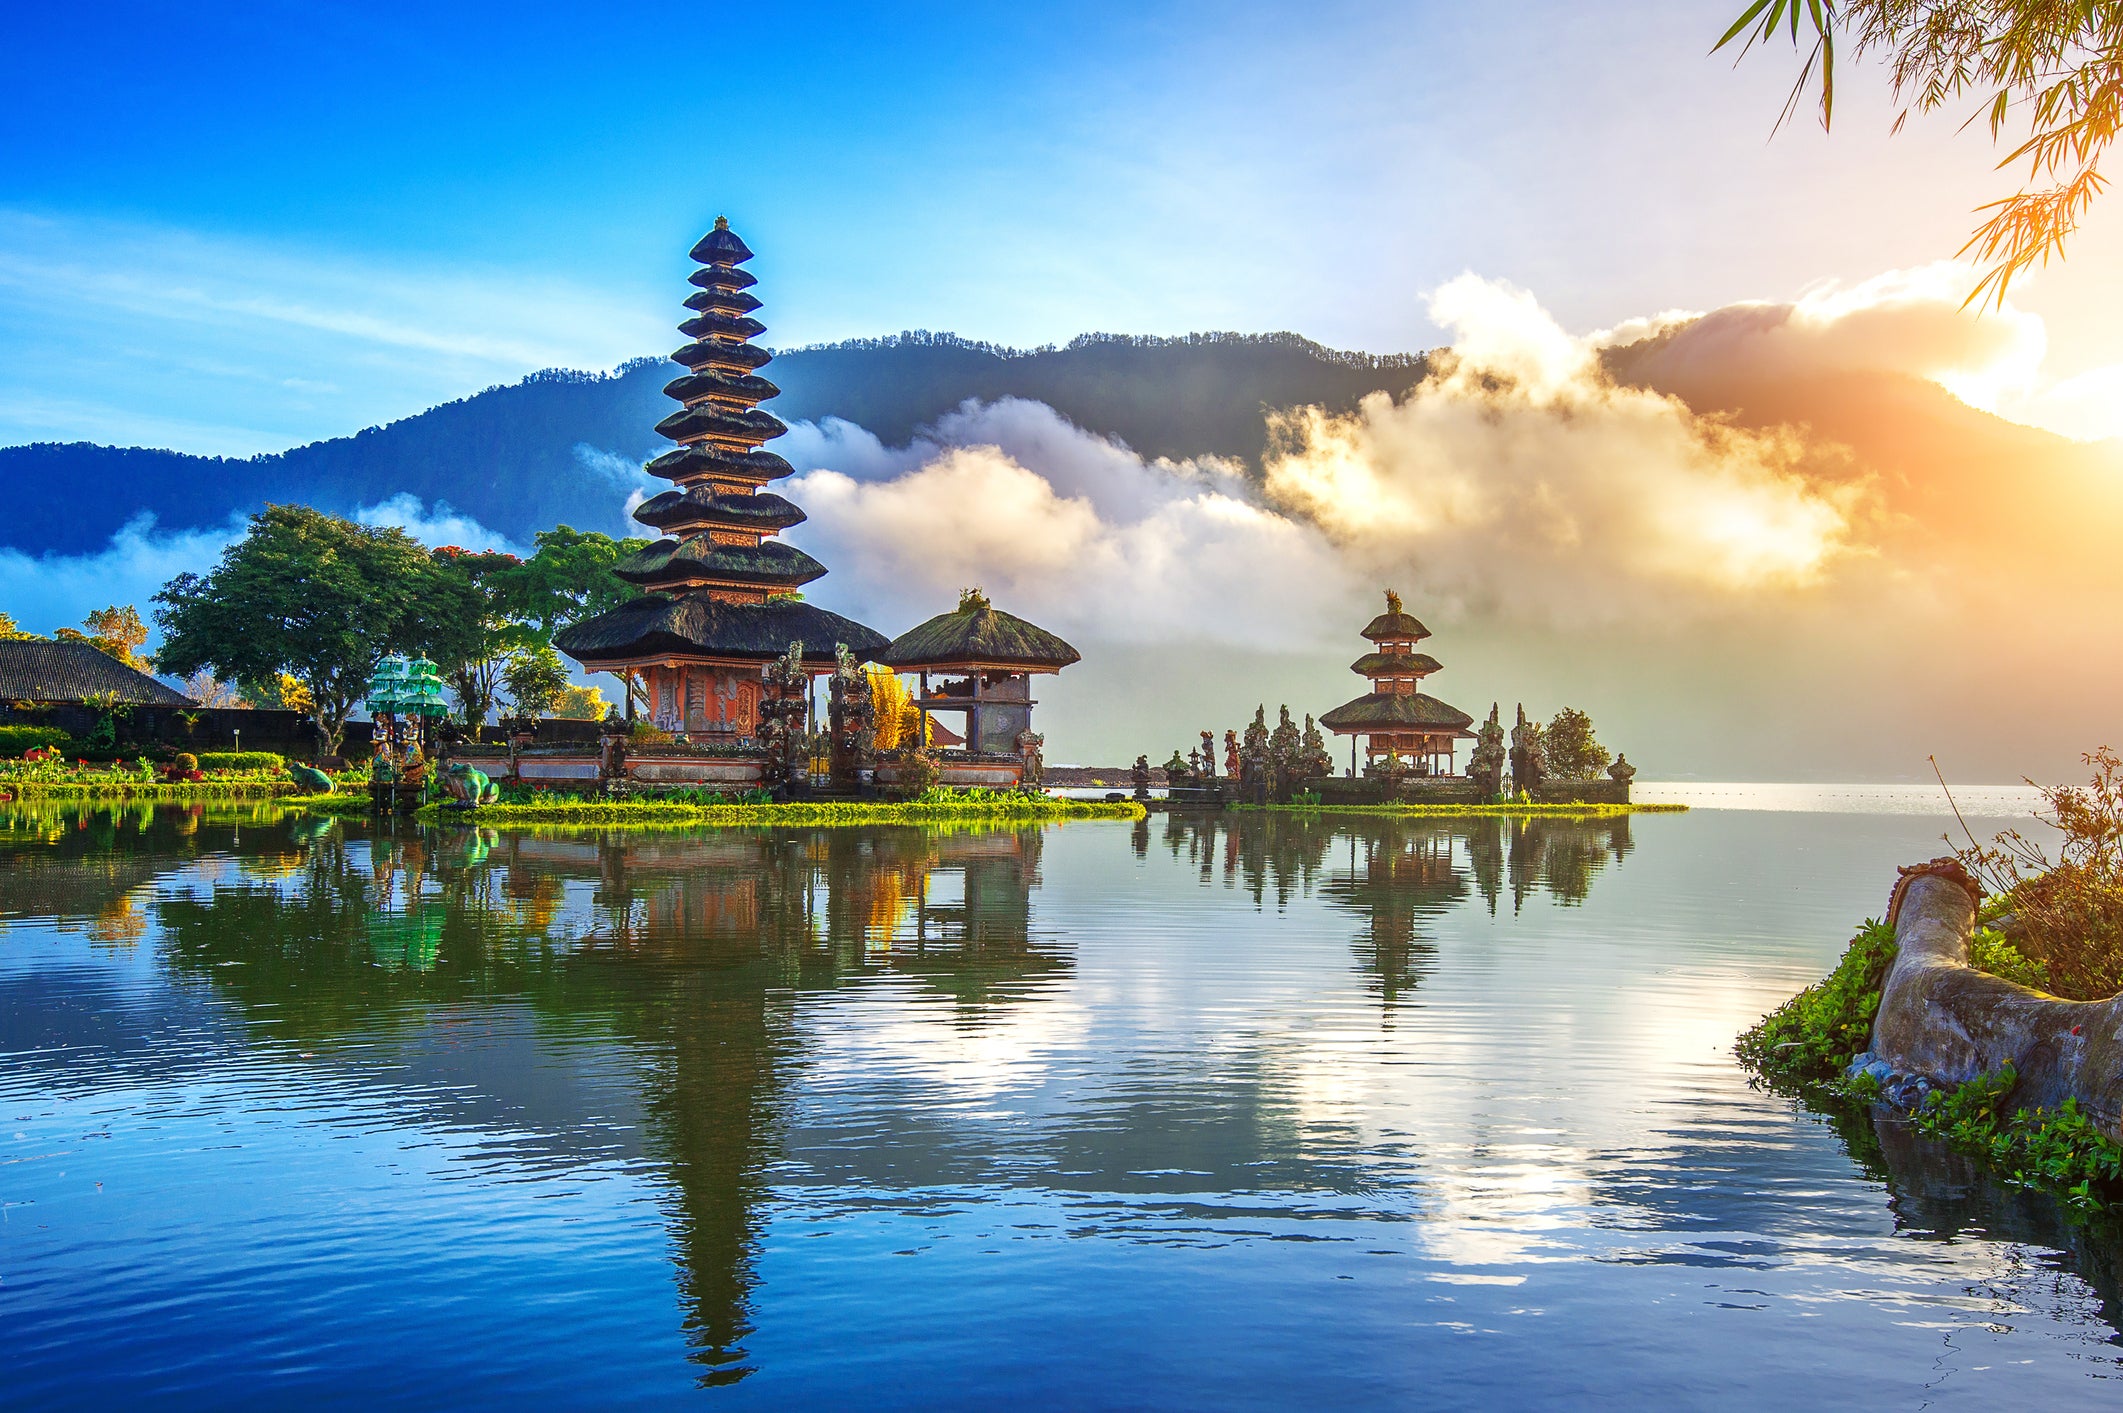 Bali’s climate is defined by high humidity and temperatures